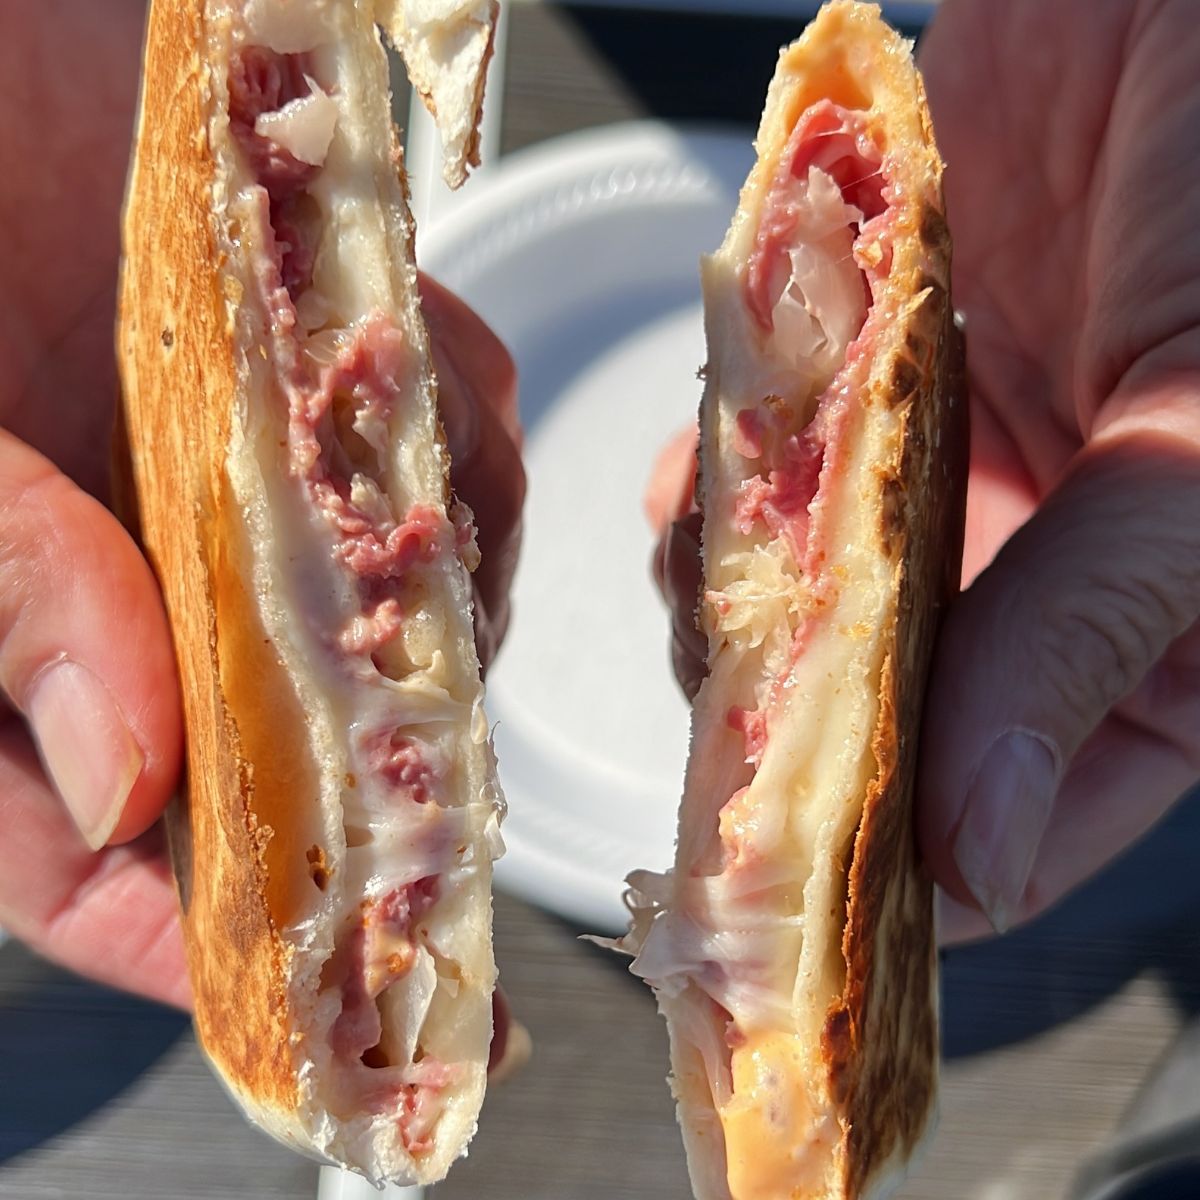 Two hands holding a halved toasted sandwich with melted cheese and ham.